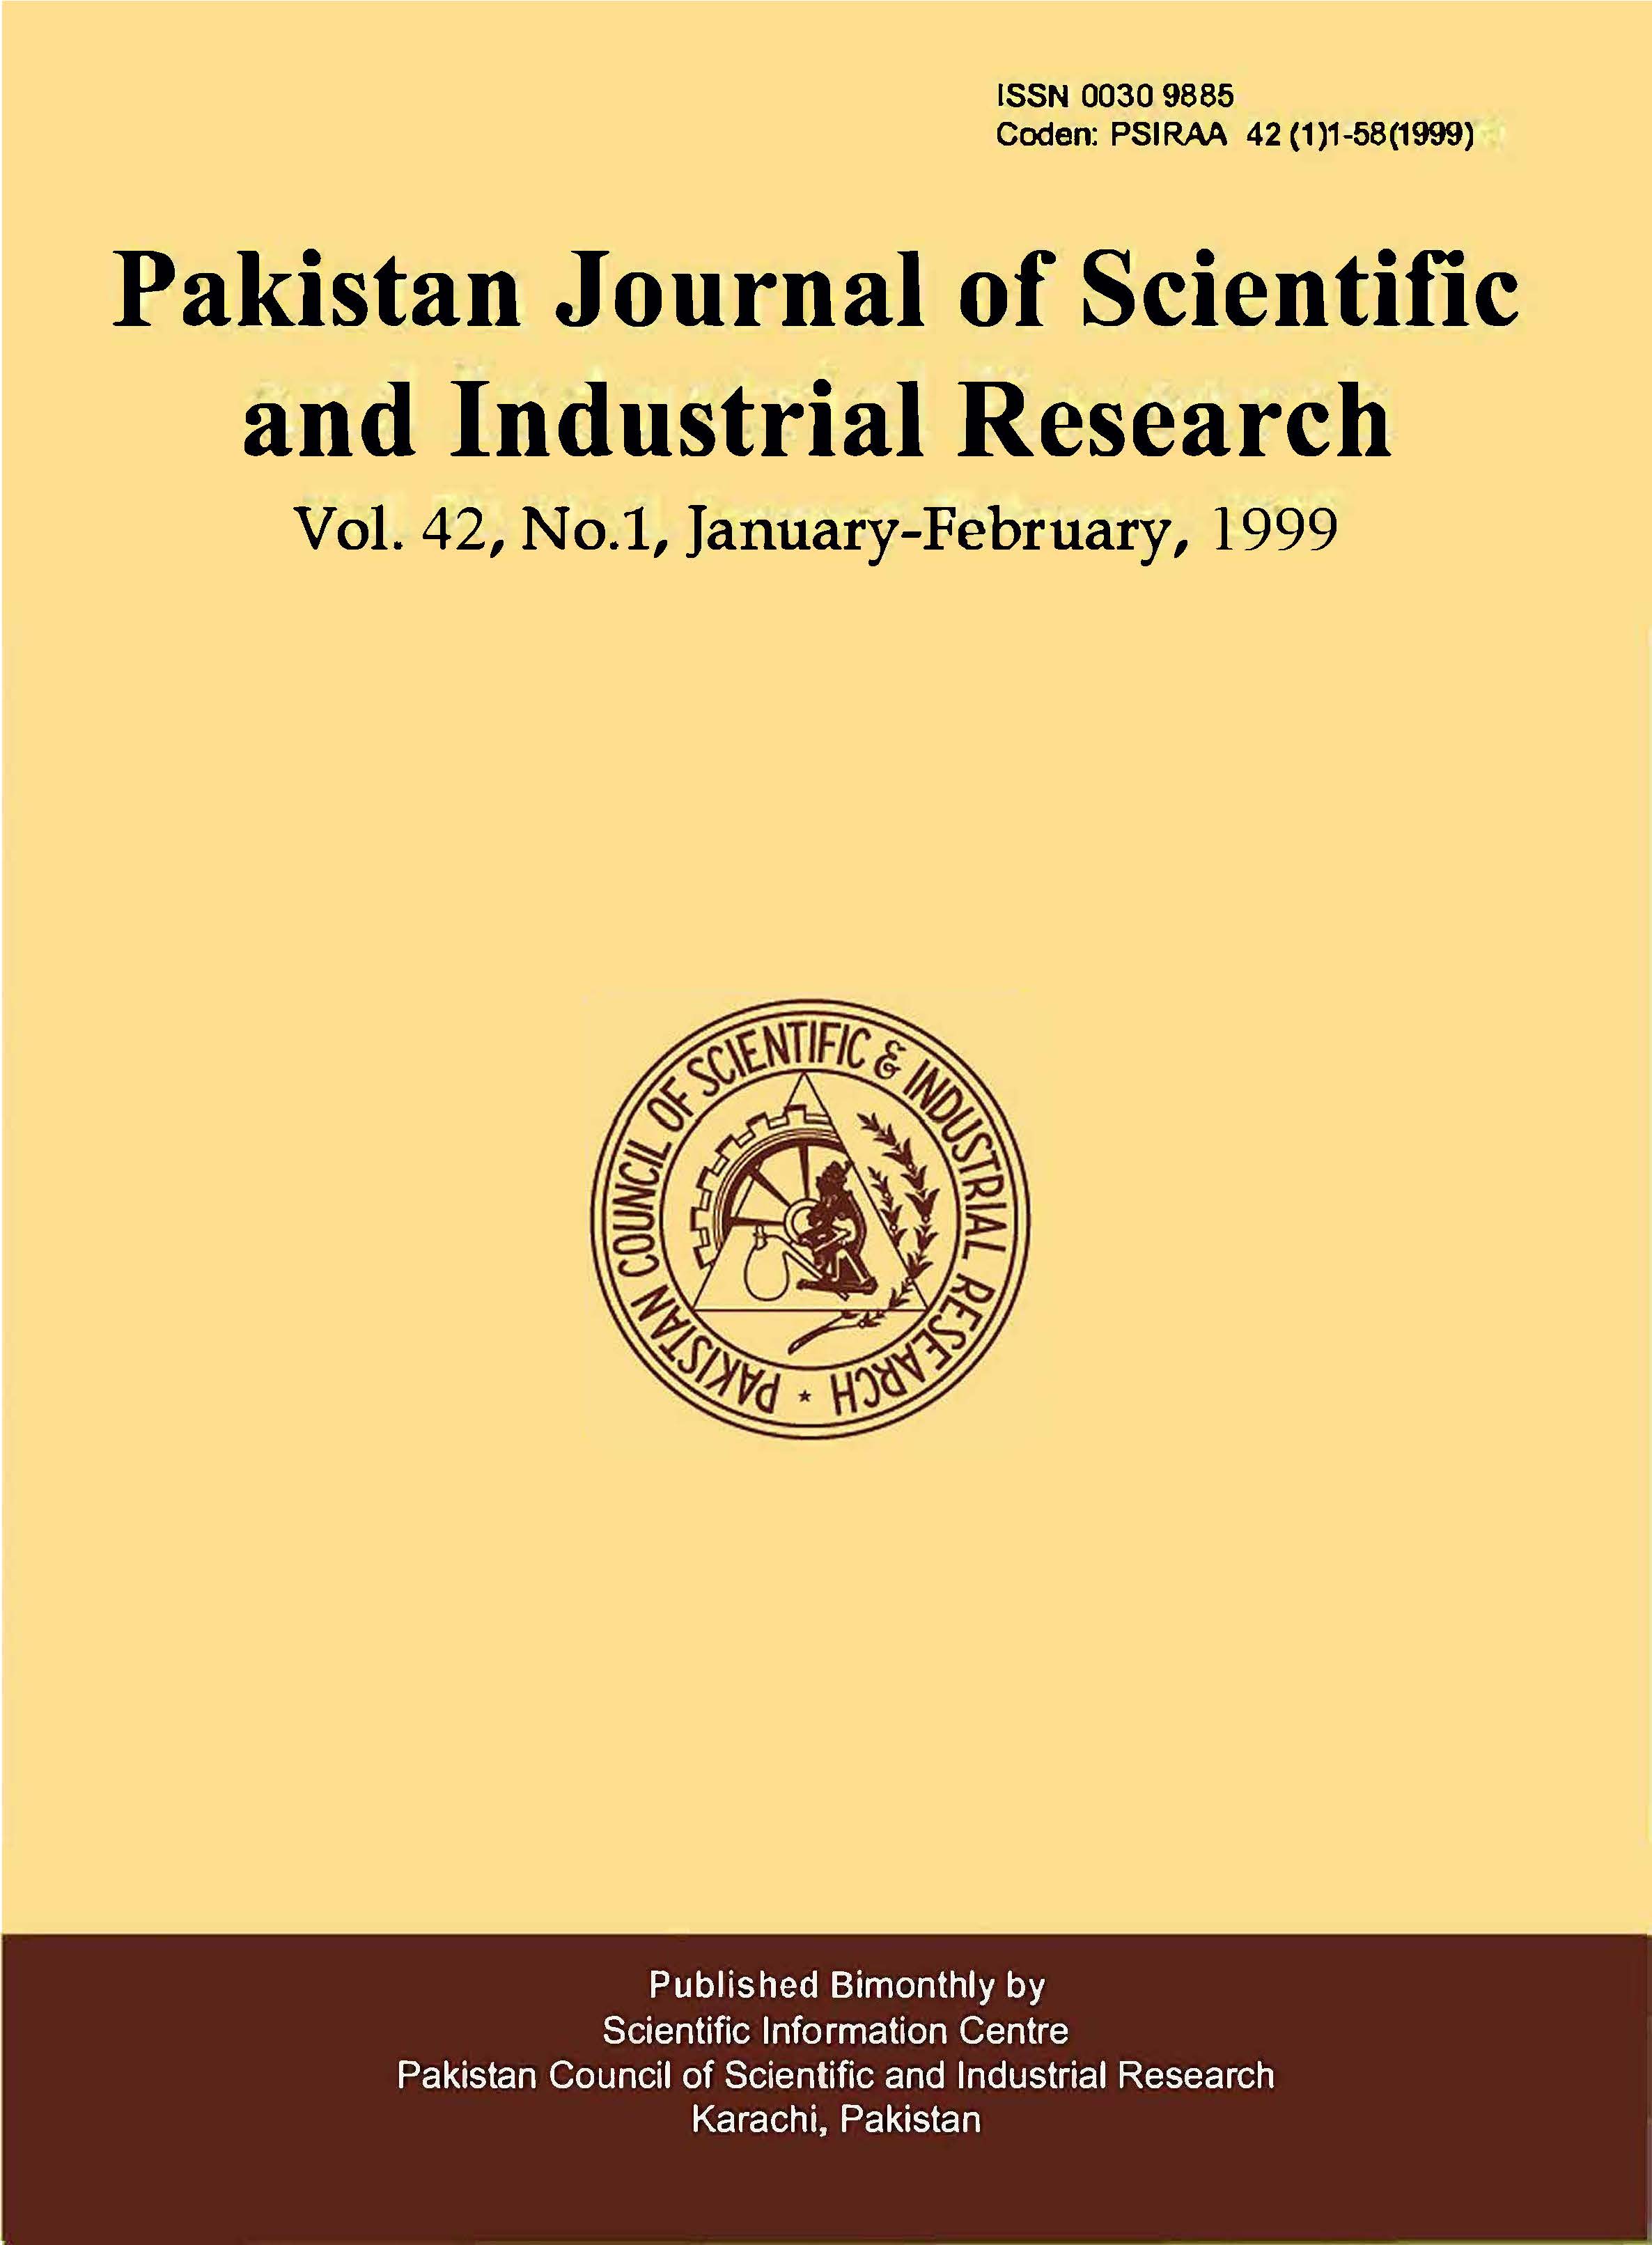 					View Vol. 42 No. 1 (1999): Pakistan Journal of Scientific and Industrial Research
				